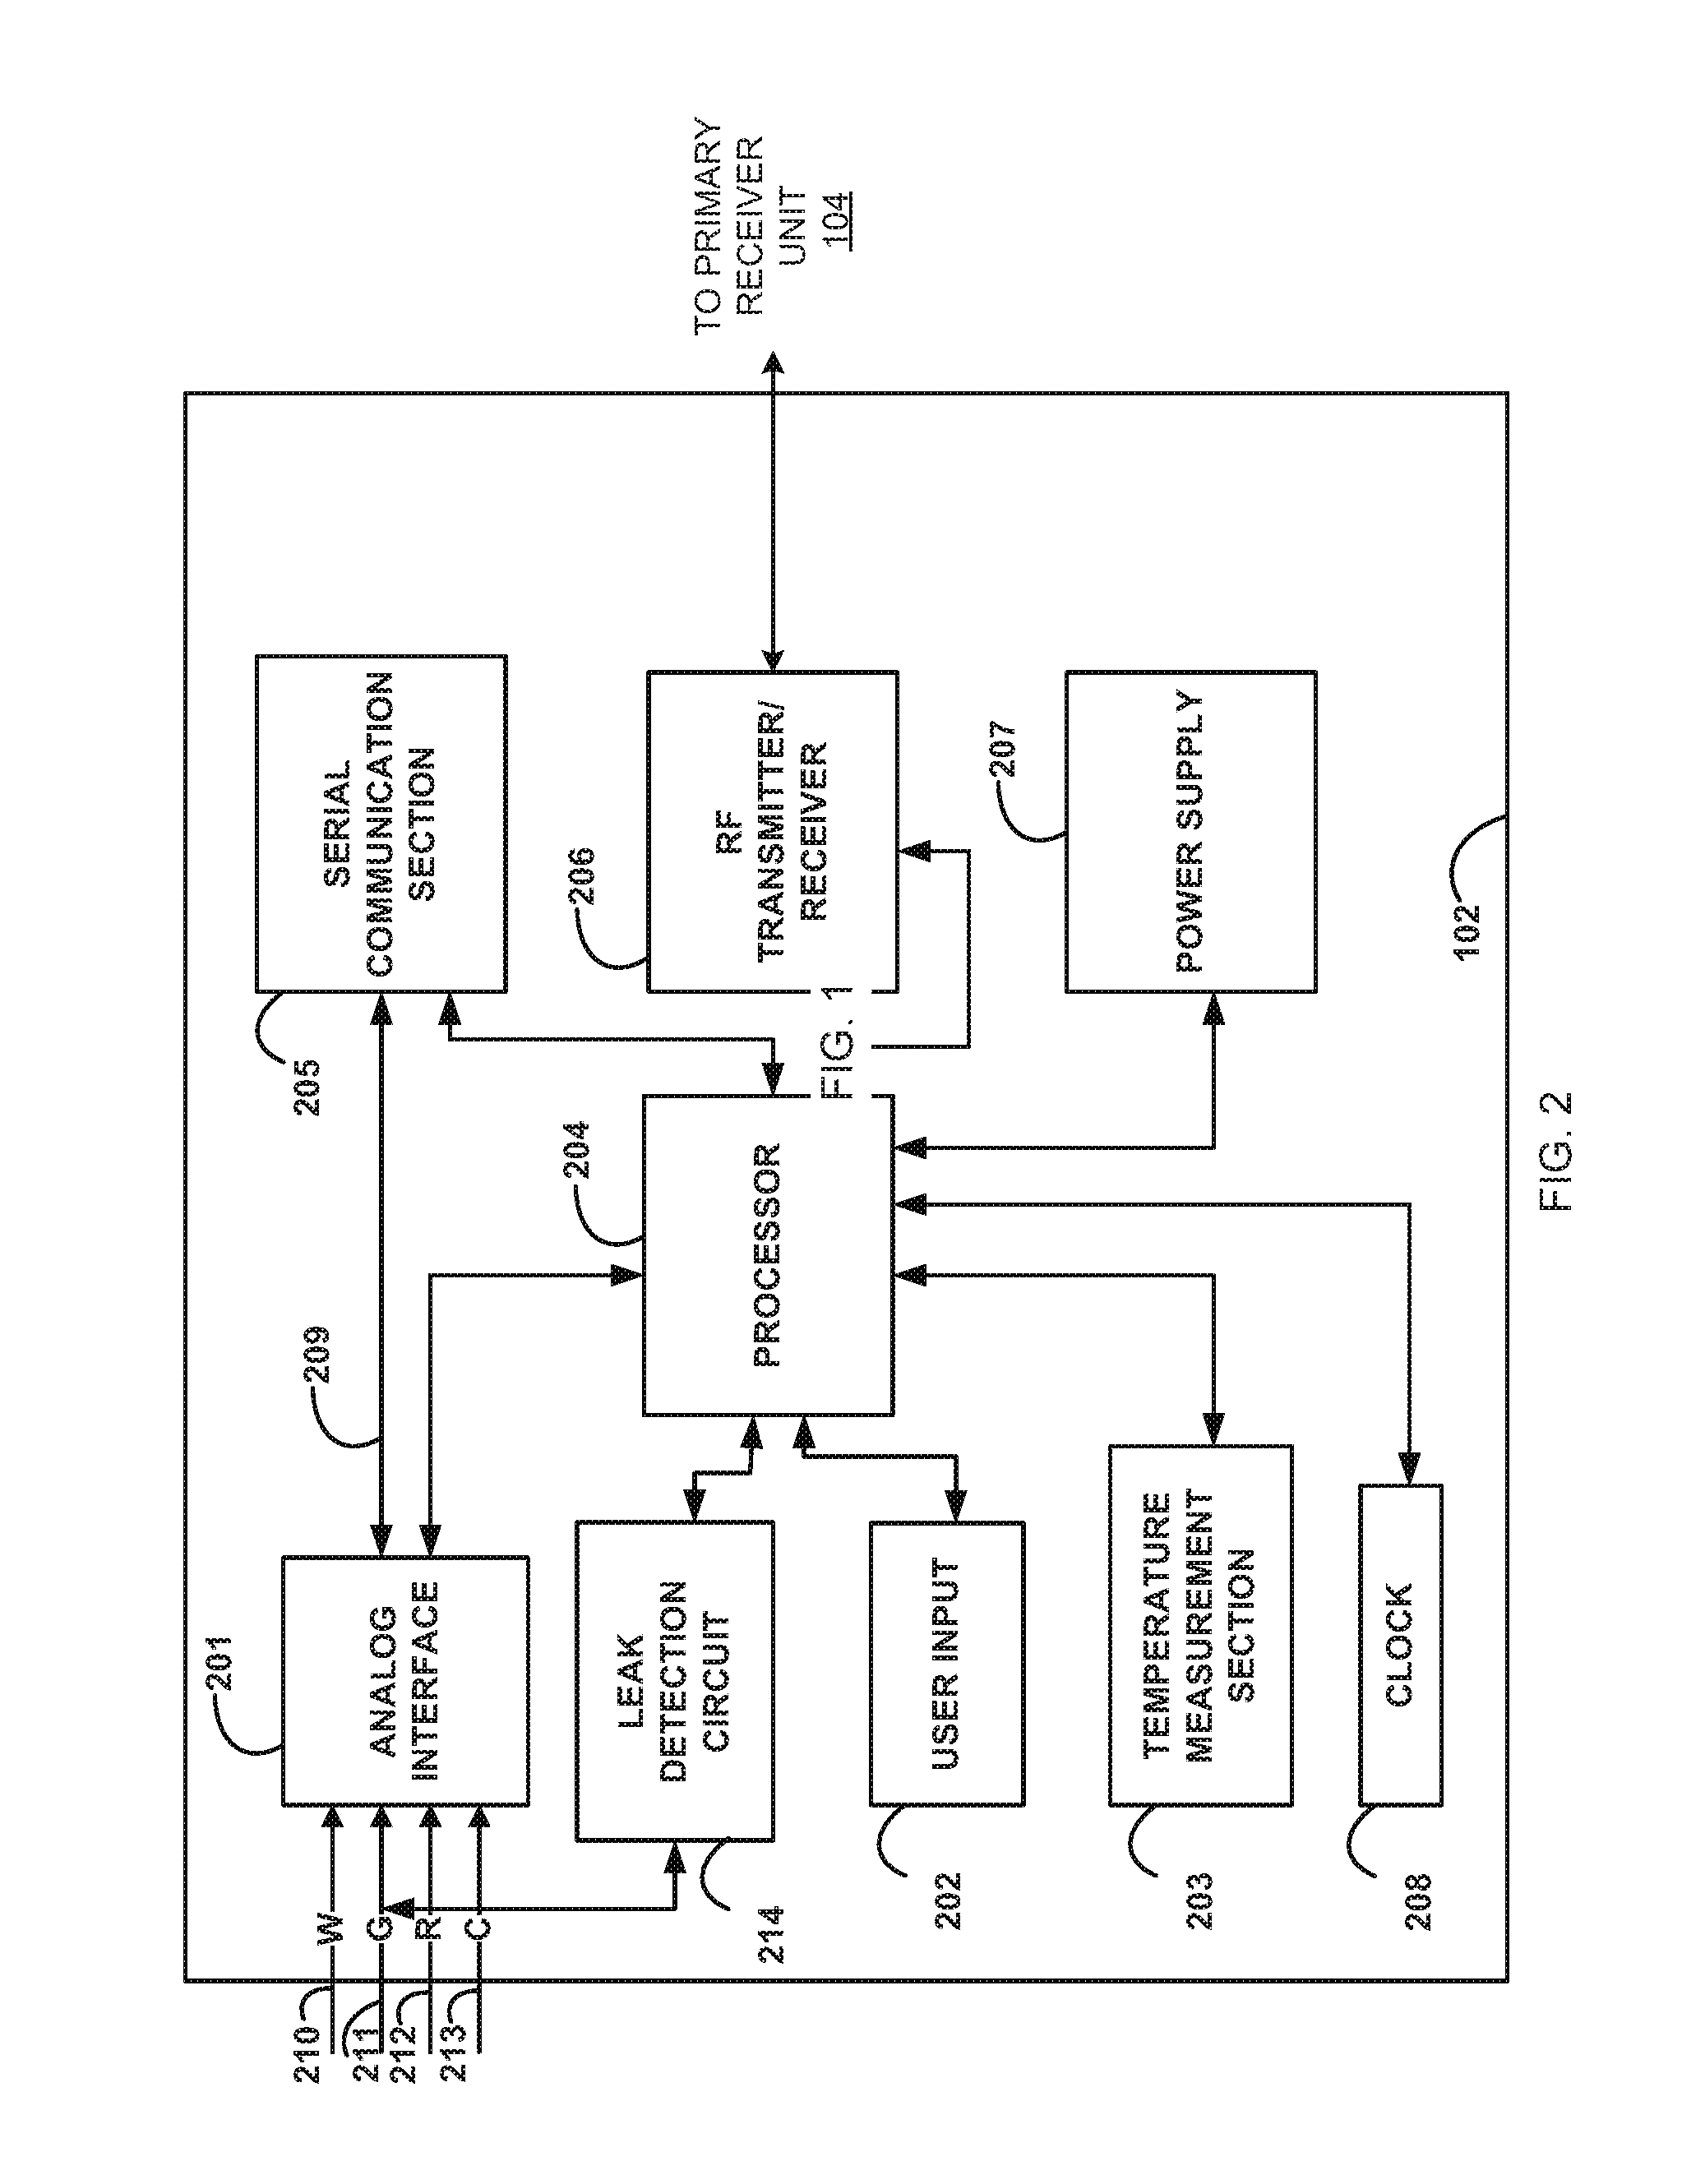 Method and System for Sterilizing an Analyte Sensor